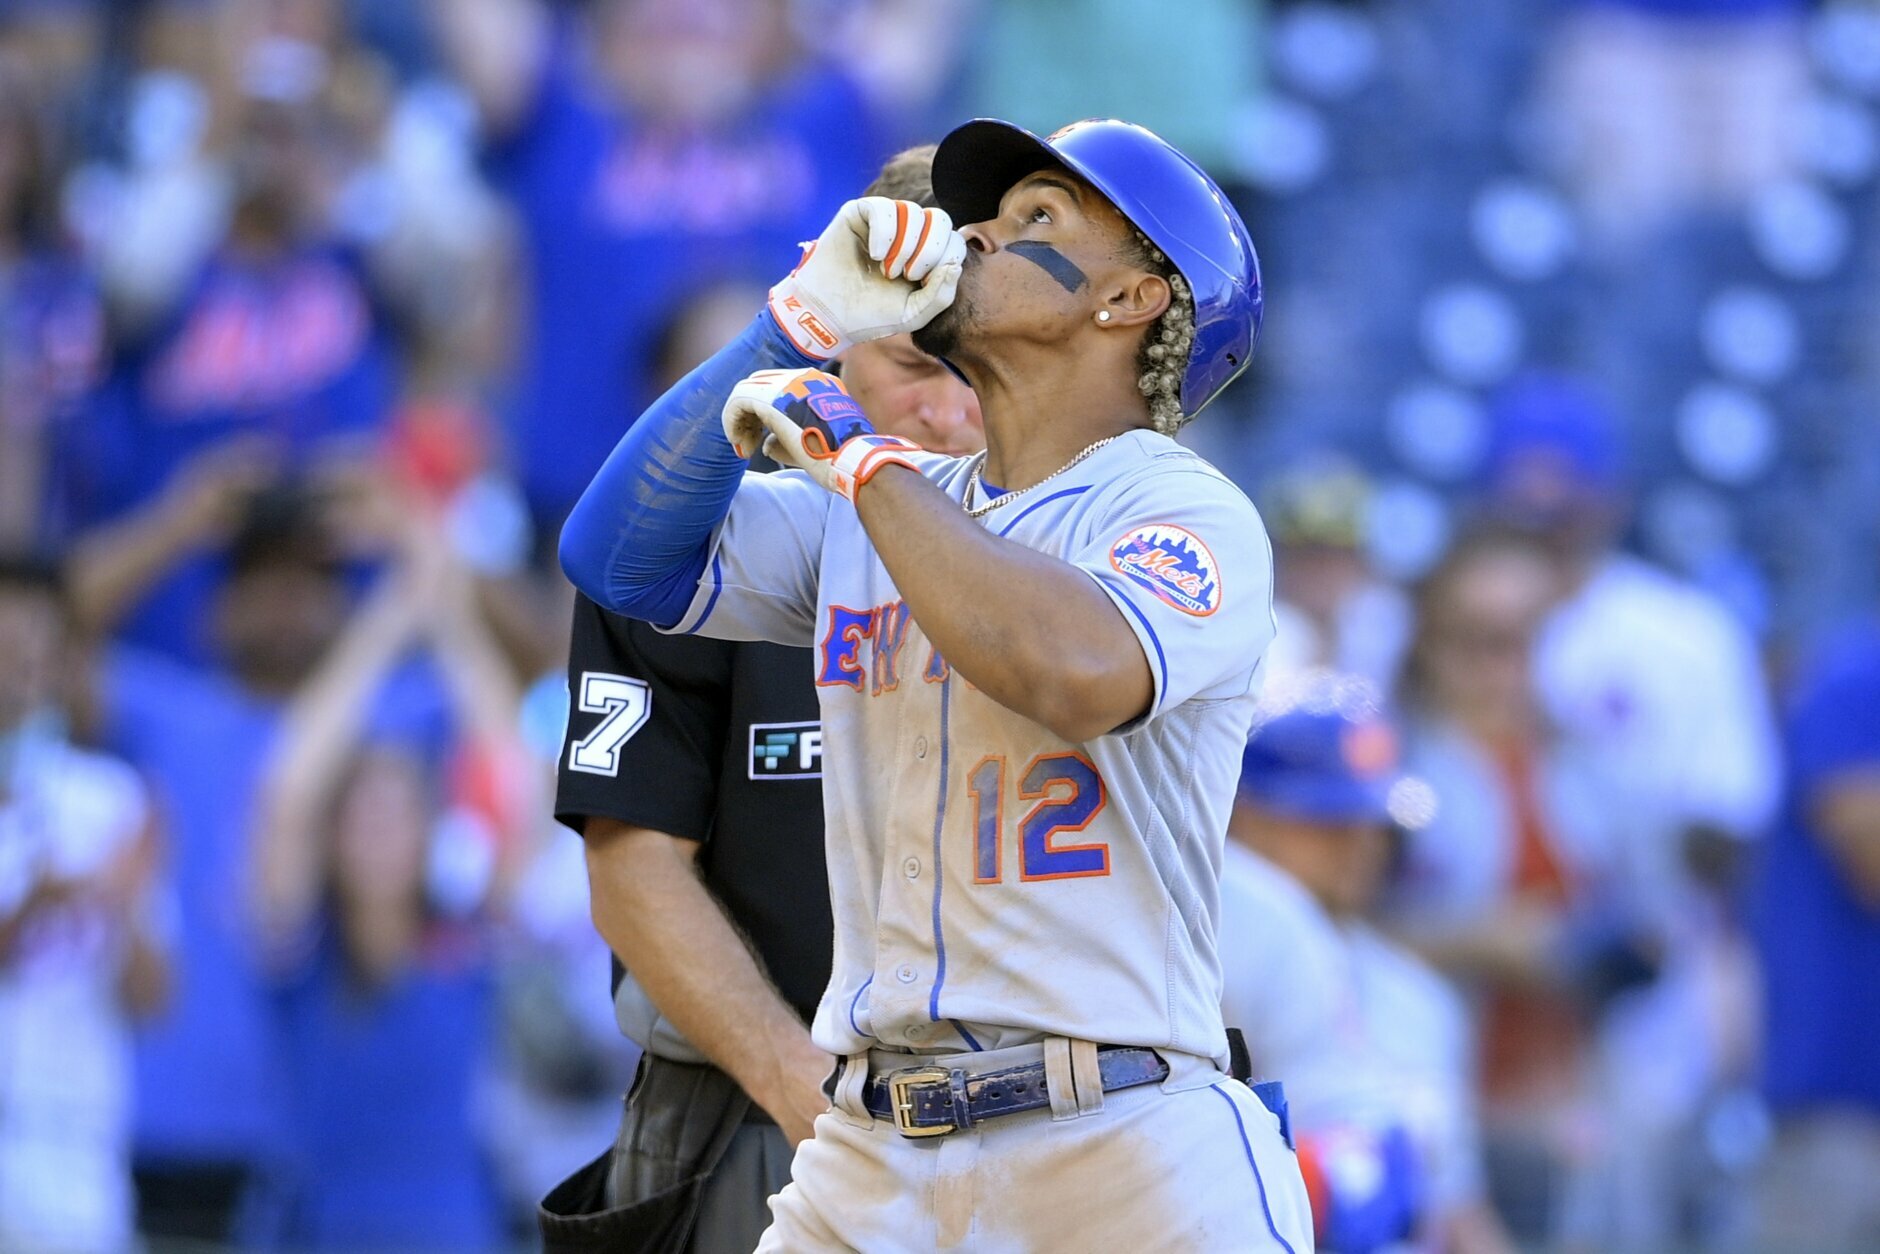 New York Mets' Francisco Lindor (12) celebrates his two-run home run during the ninth inning of the first baseball game of a doubleheader against the Washington Nationals, Saturday, Sept. 4, 2021, in Washington. The Mets won 11-9 in extra innings. (AP Photo/Nick Wass)